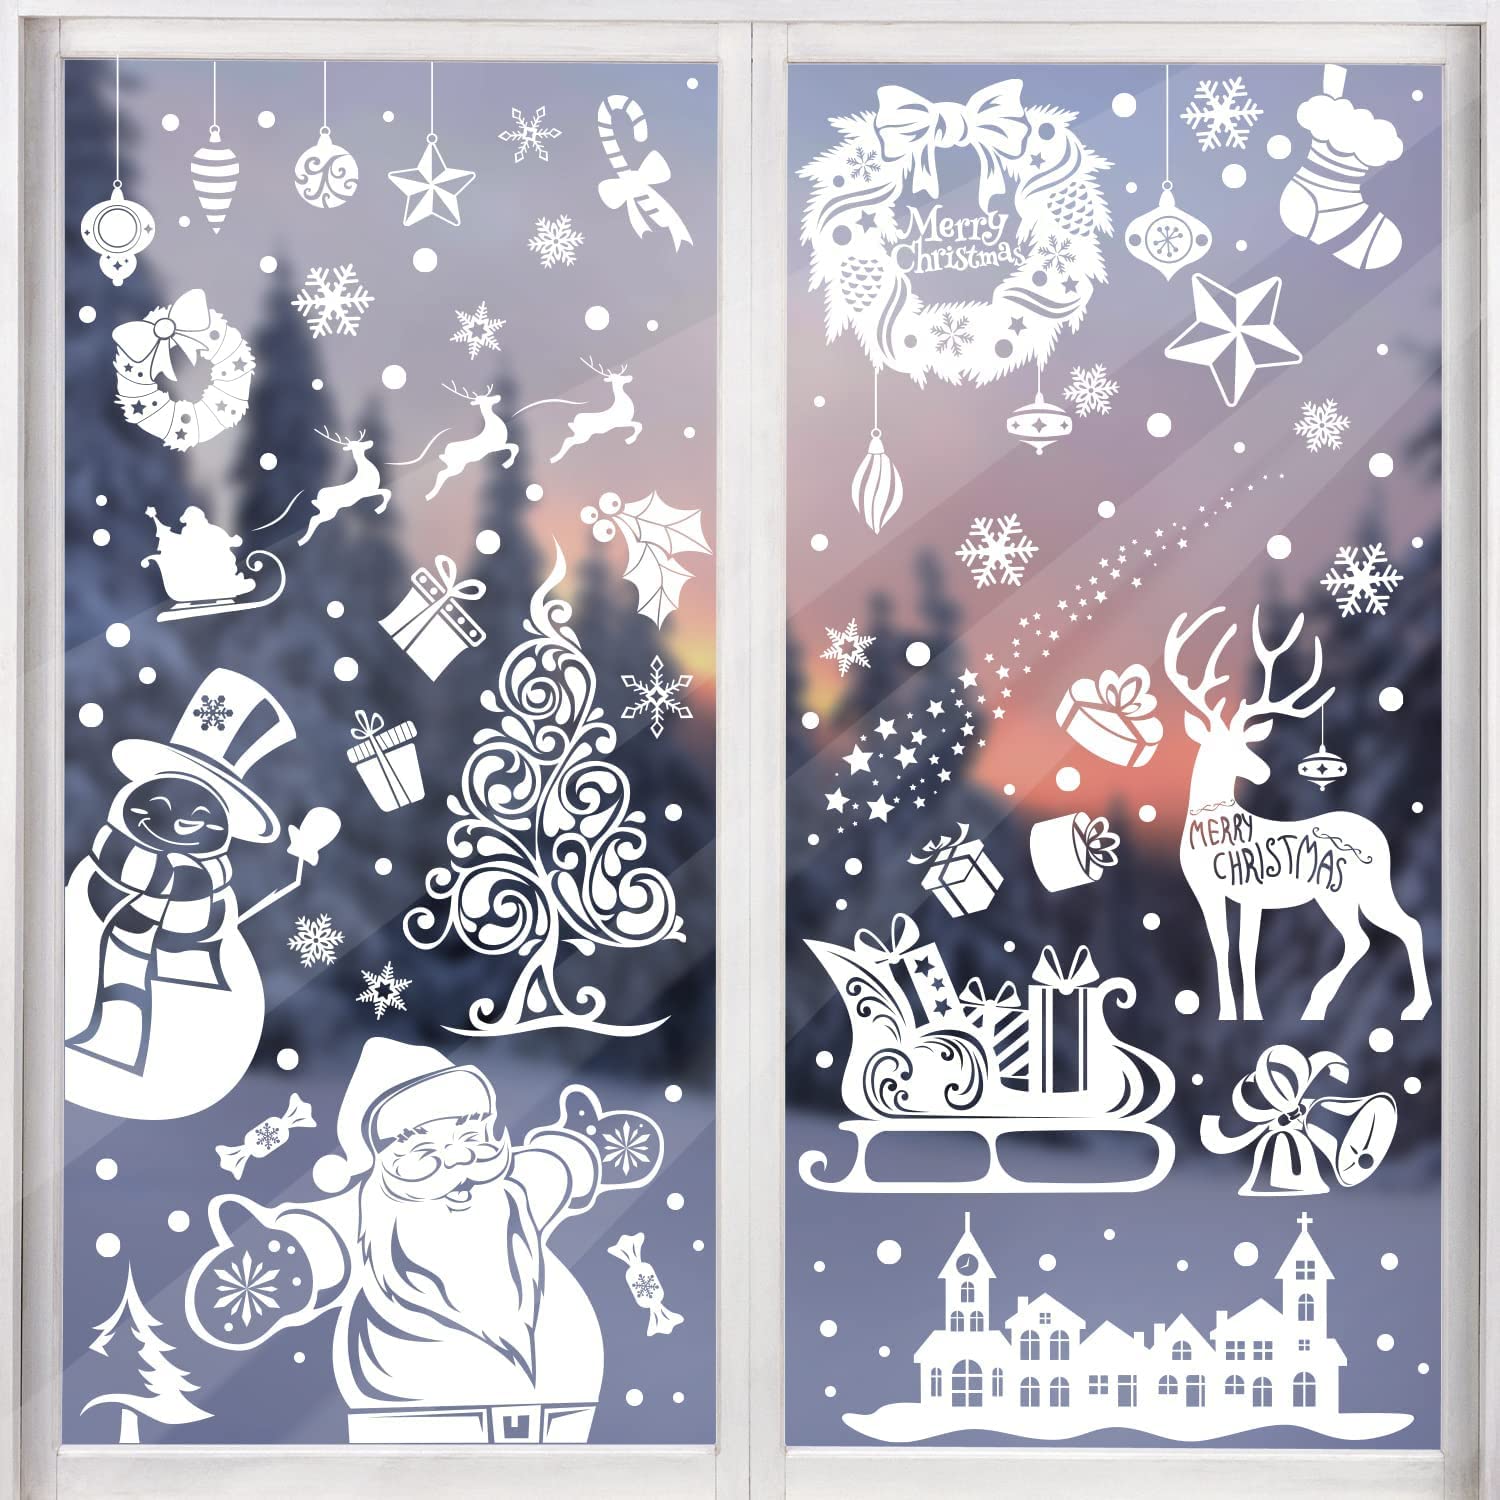 CCINEE Christmas Window Clings, 167pcs White Xmas Window Sticker 8 Sheets Snowflakes Santa Claus Reindeer Decals for Holiday Dec